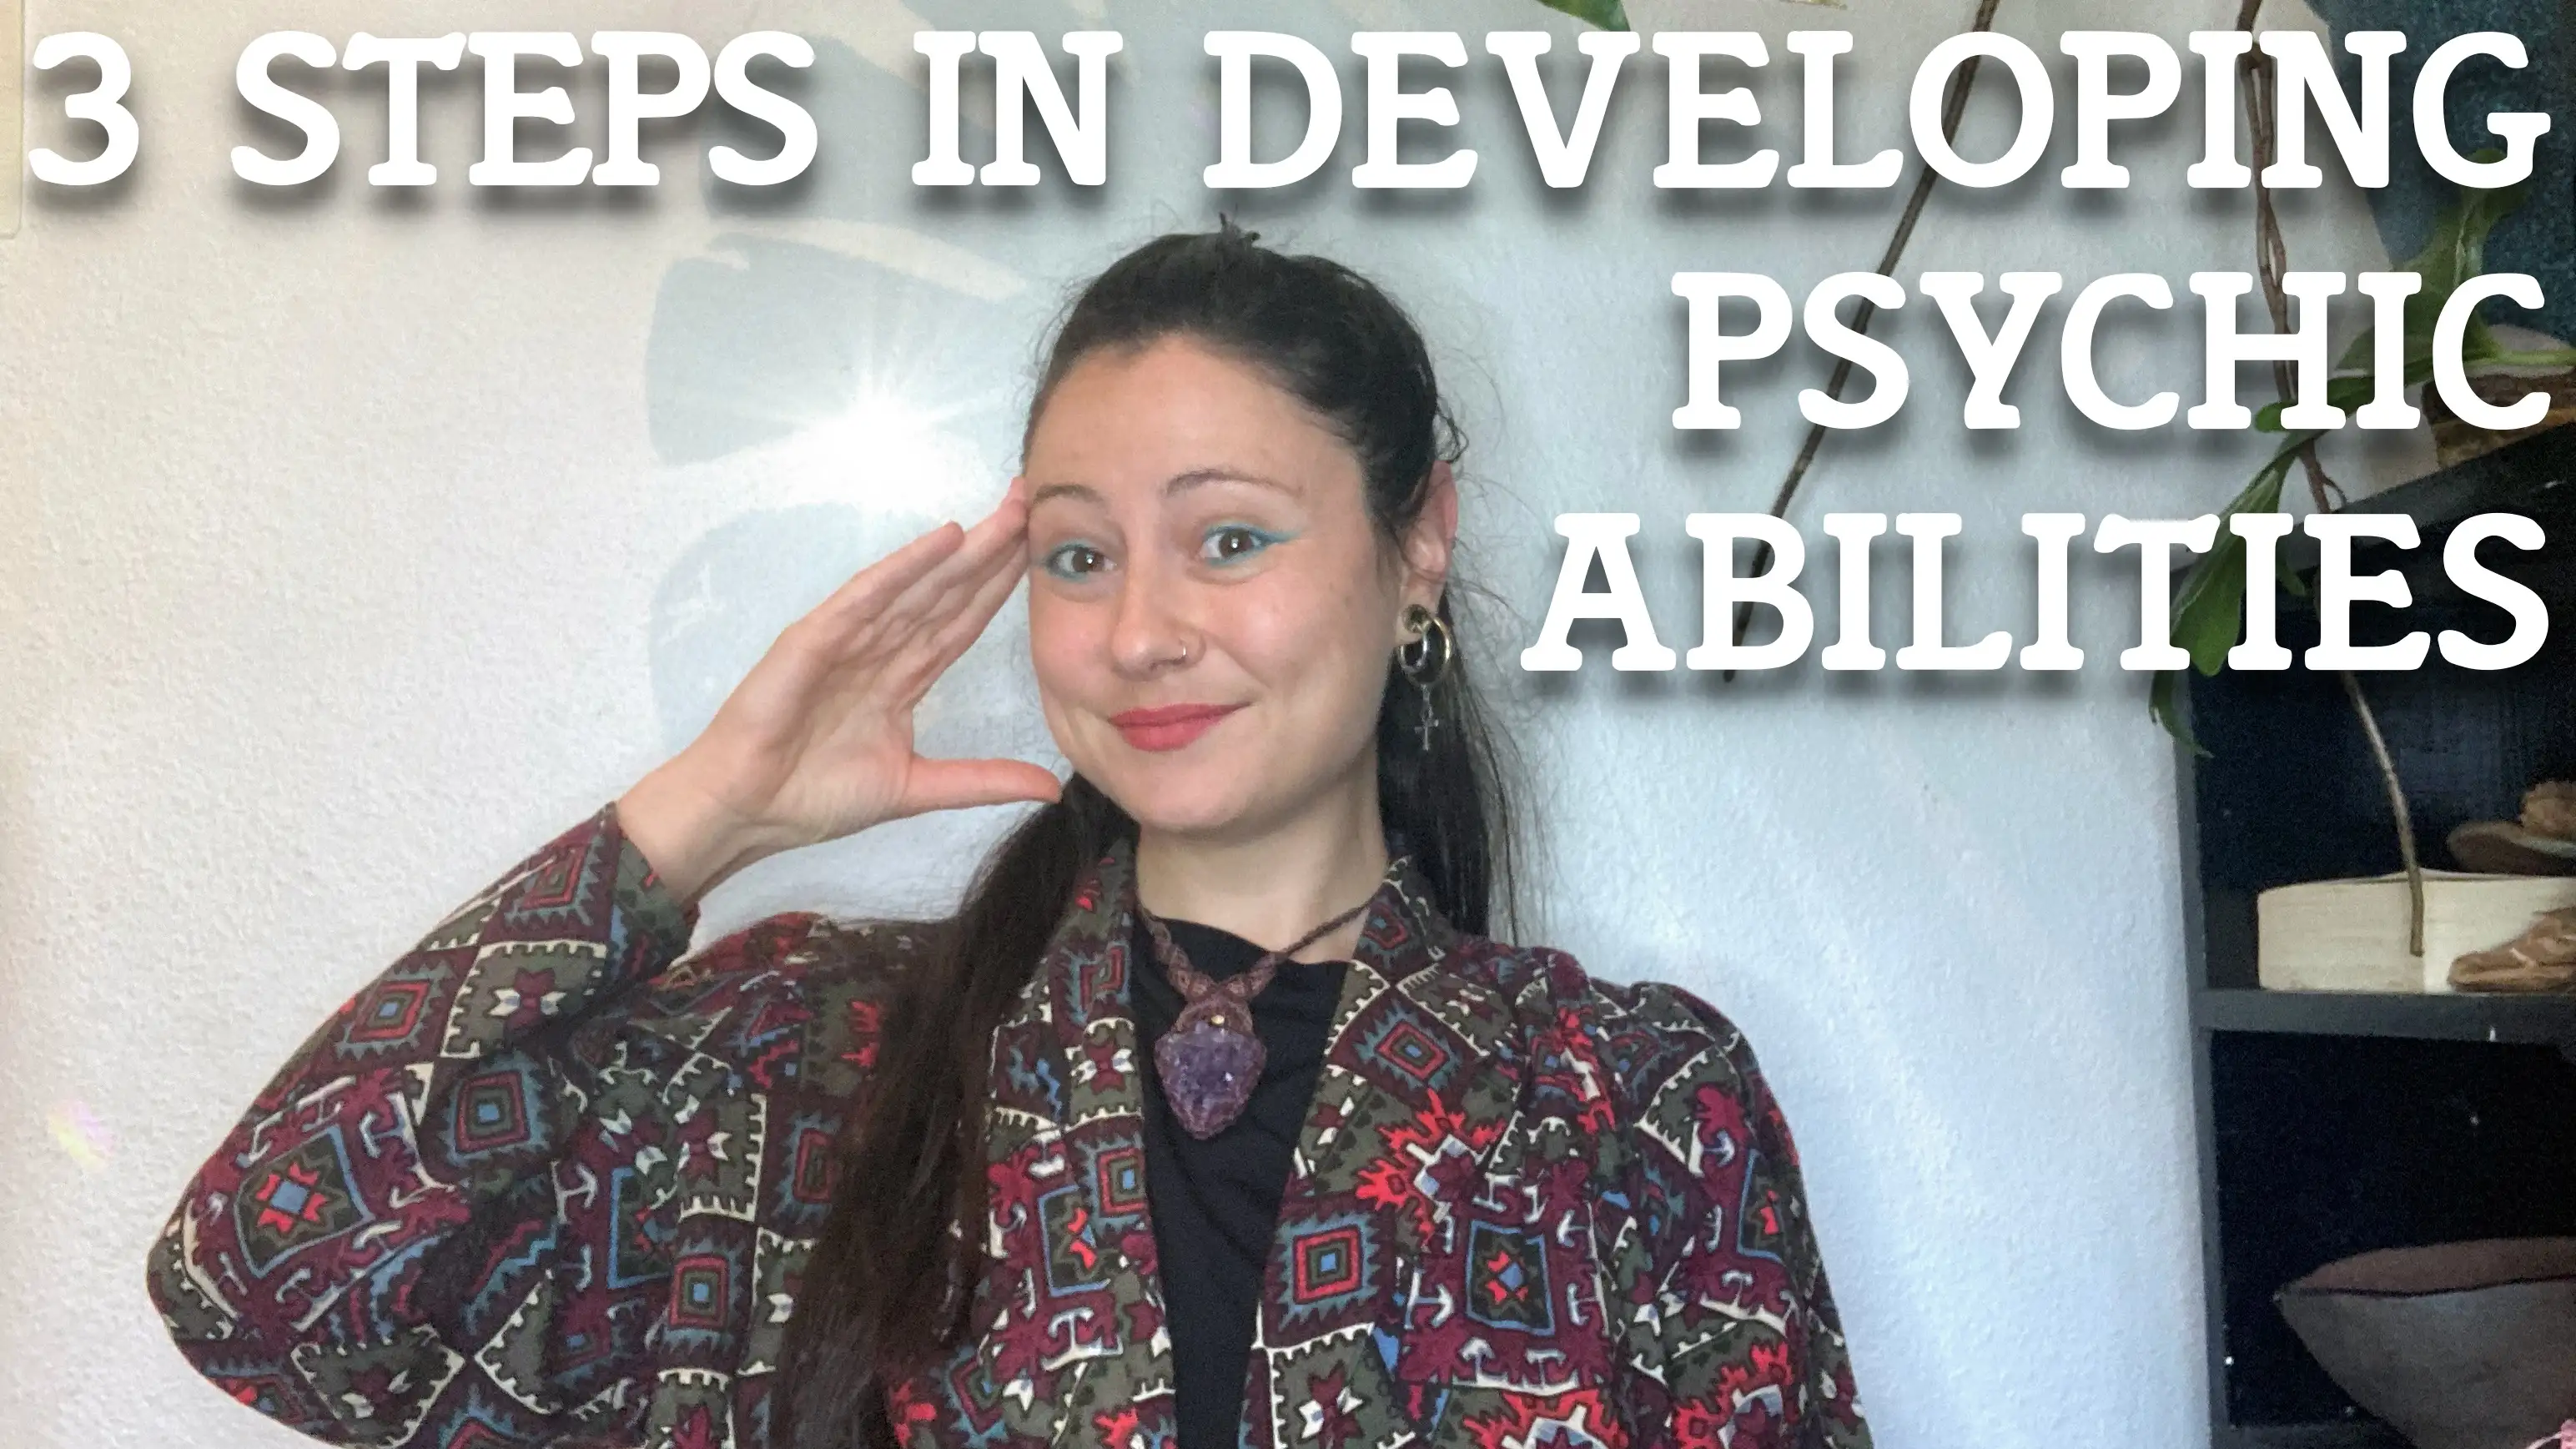 3 Steps to Developing Psychic Abilities